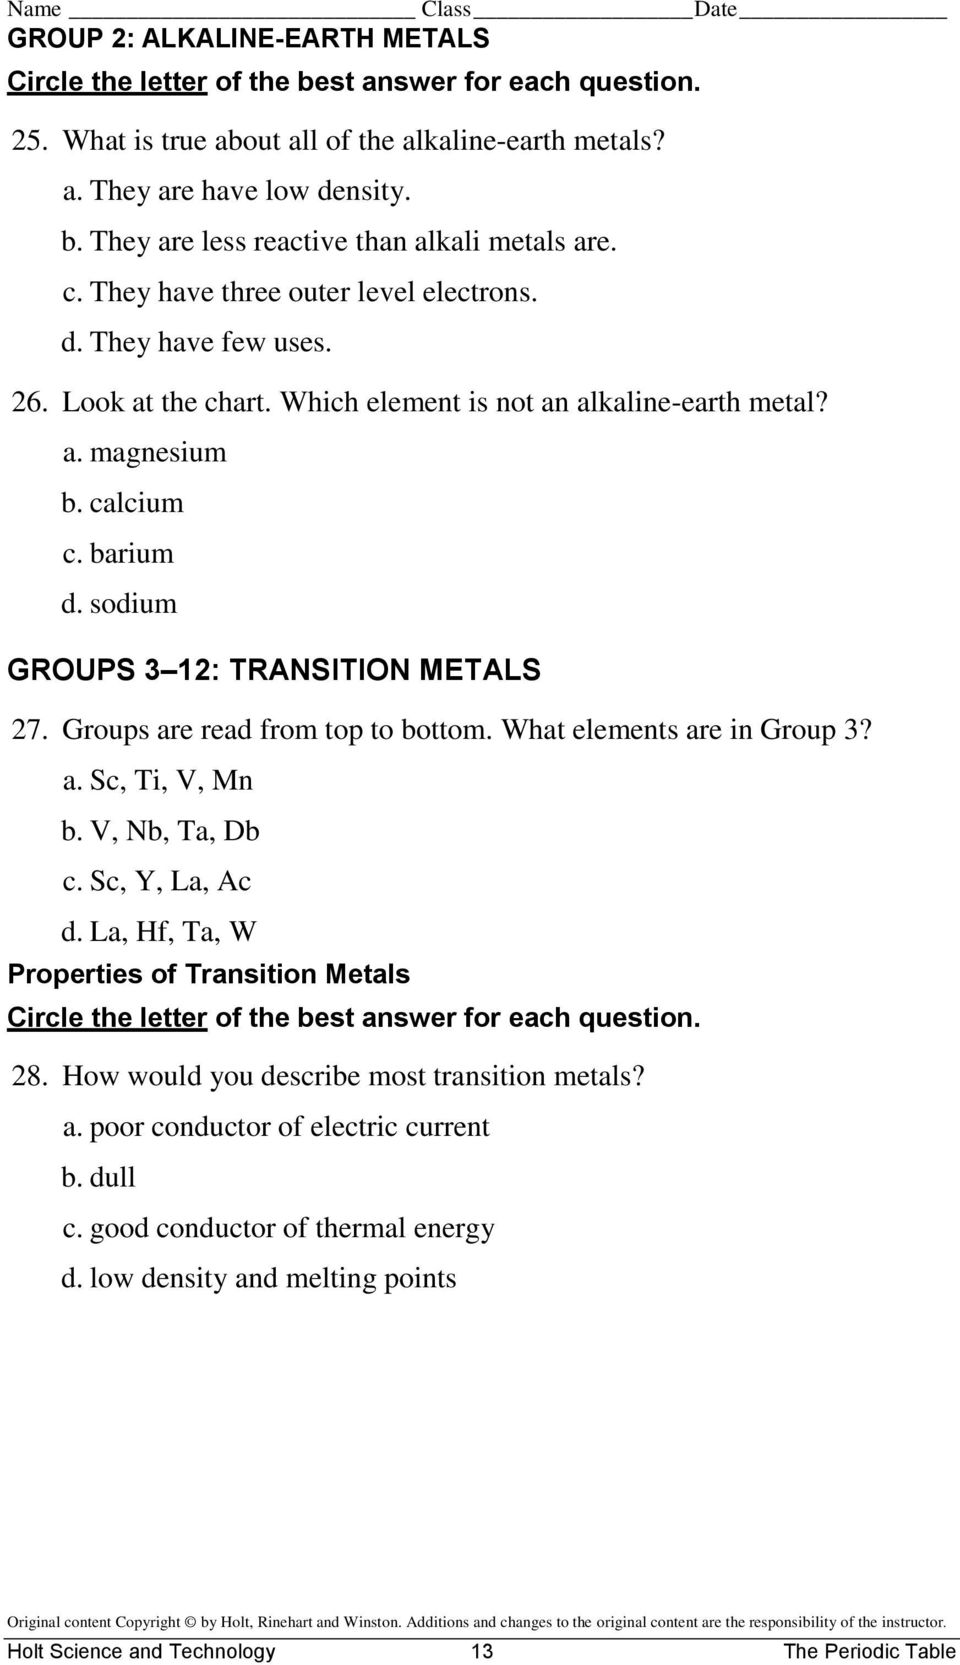 sodium GROUPS 3 12: TRANSITION METALS 27. Groups are read from top to bottom. What elements are in Group 3? a. Sc, Ti, V, Mn b. V, Nb, Ta, Db c. Sc, Y, La, Ac d.